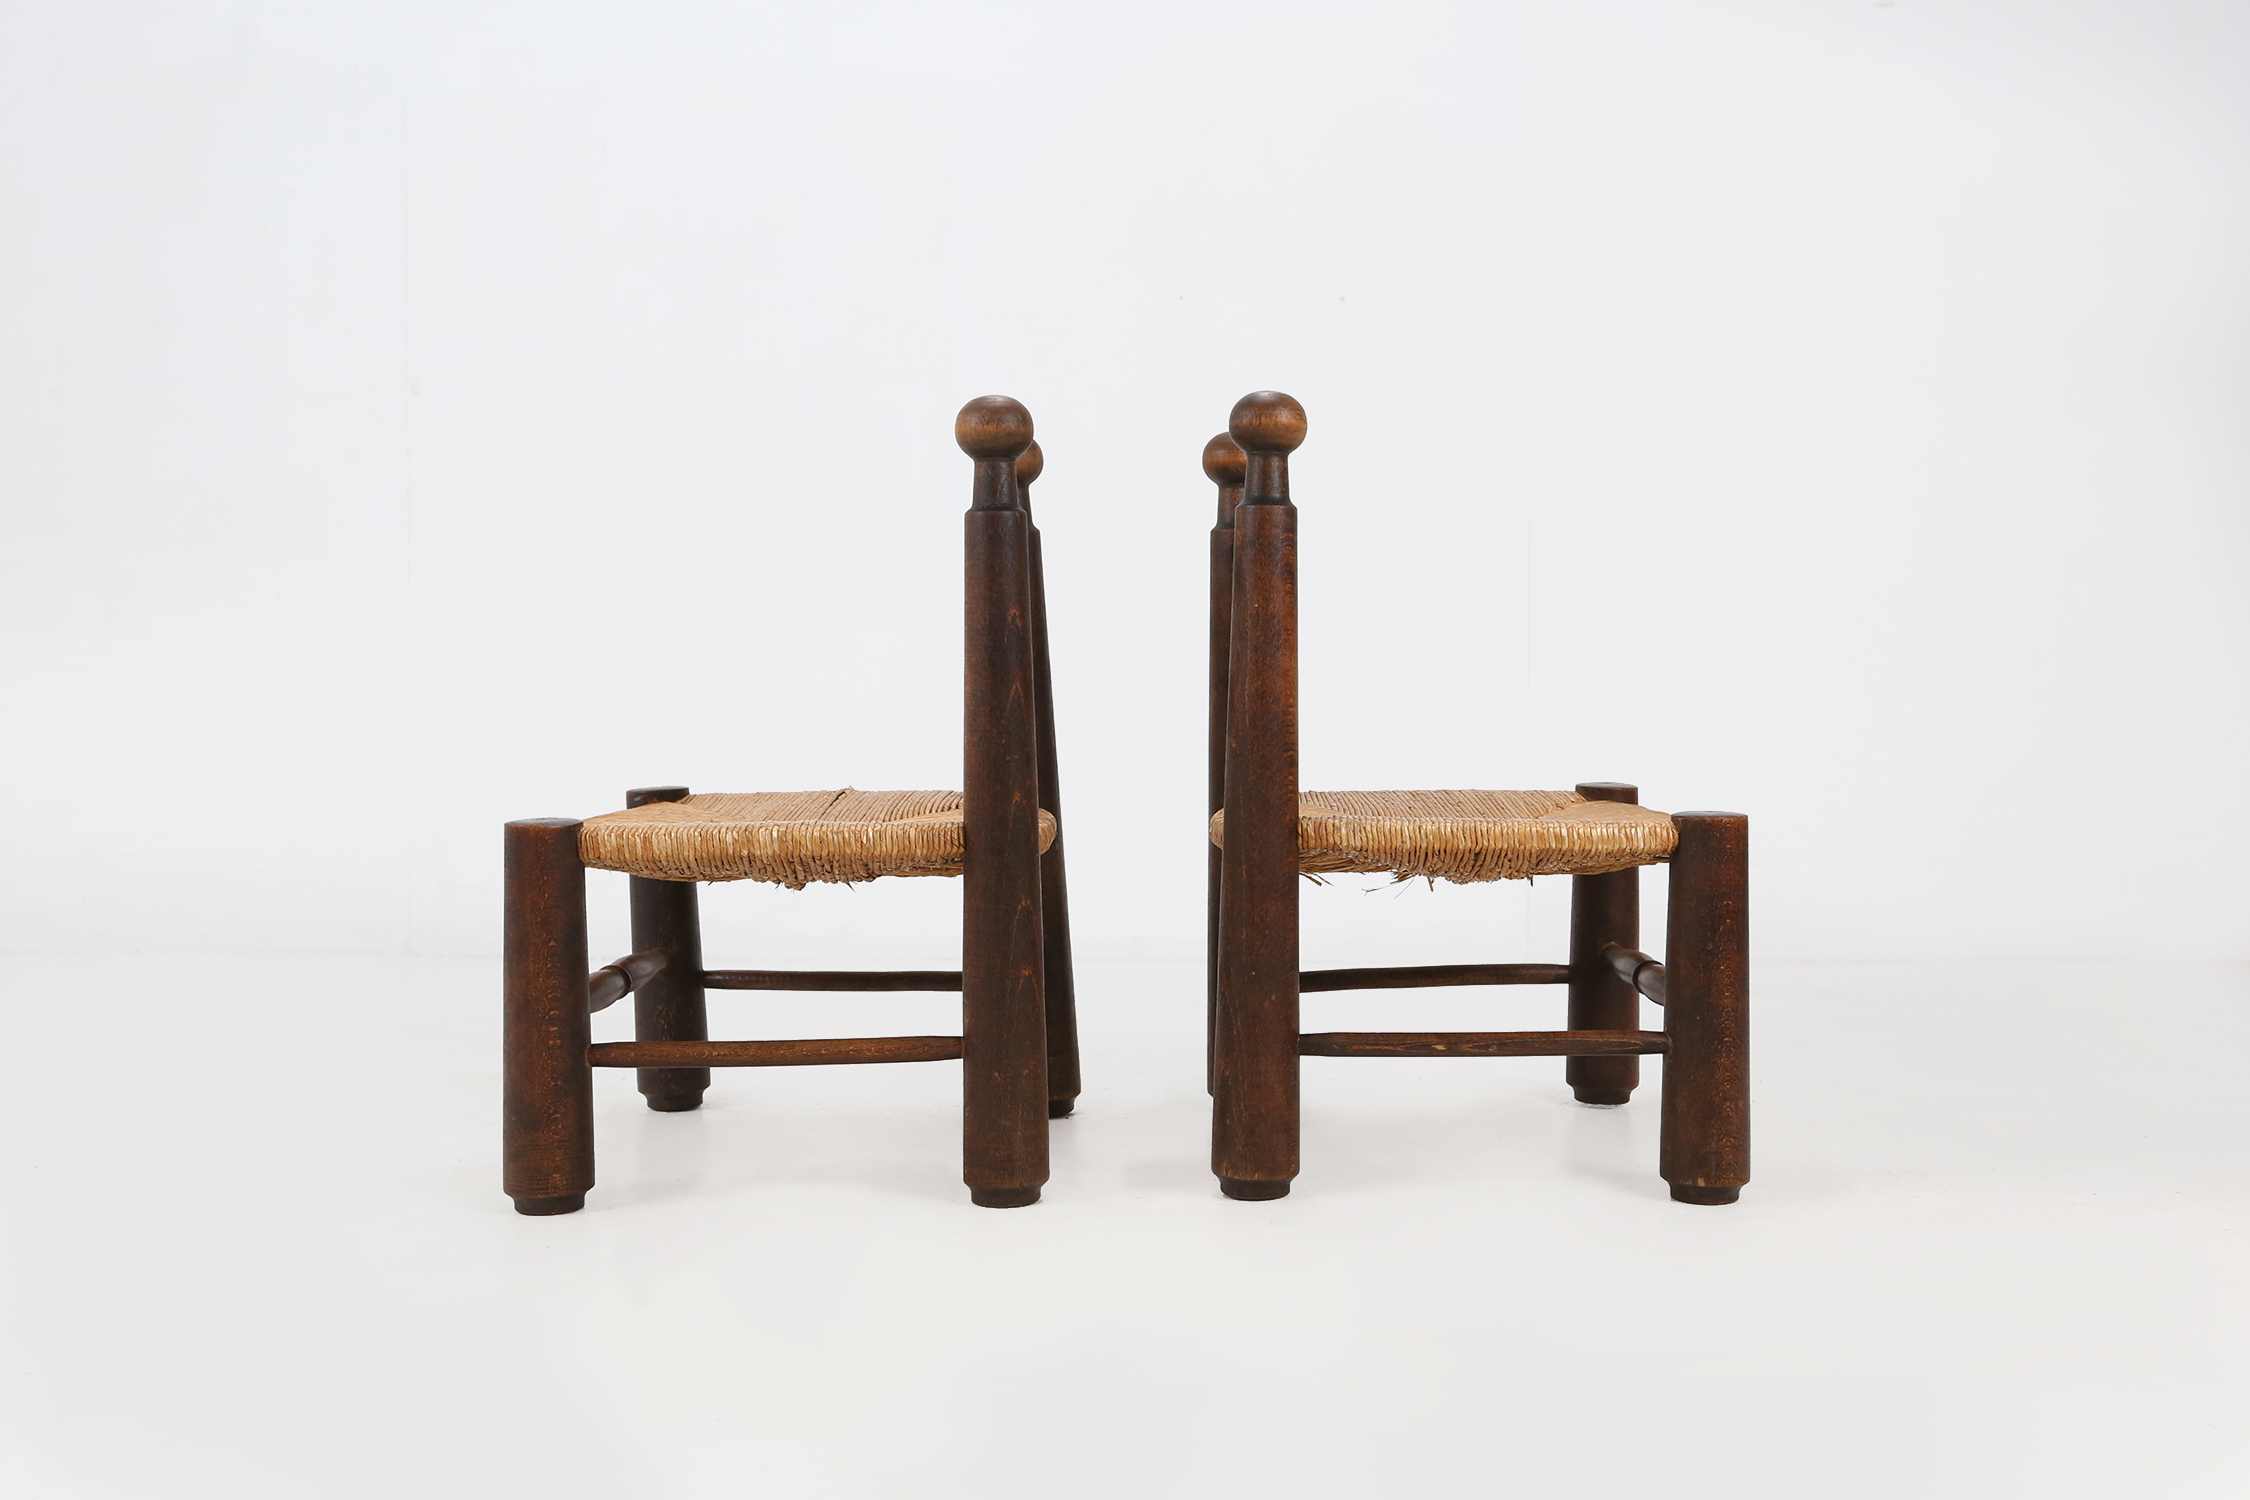 Small wooden and wicker chairs by Charles Dudouytthumbnail